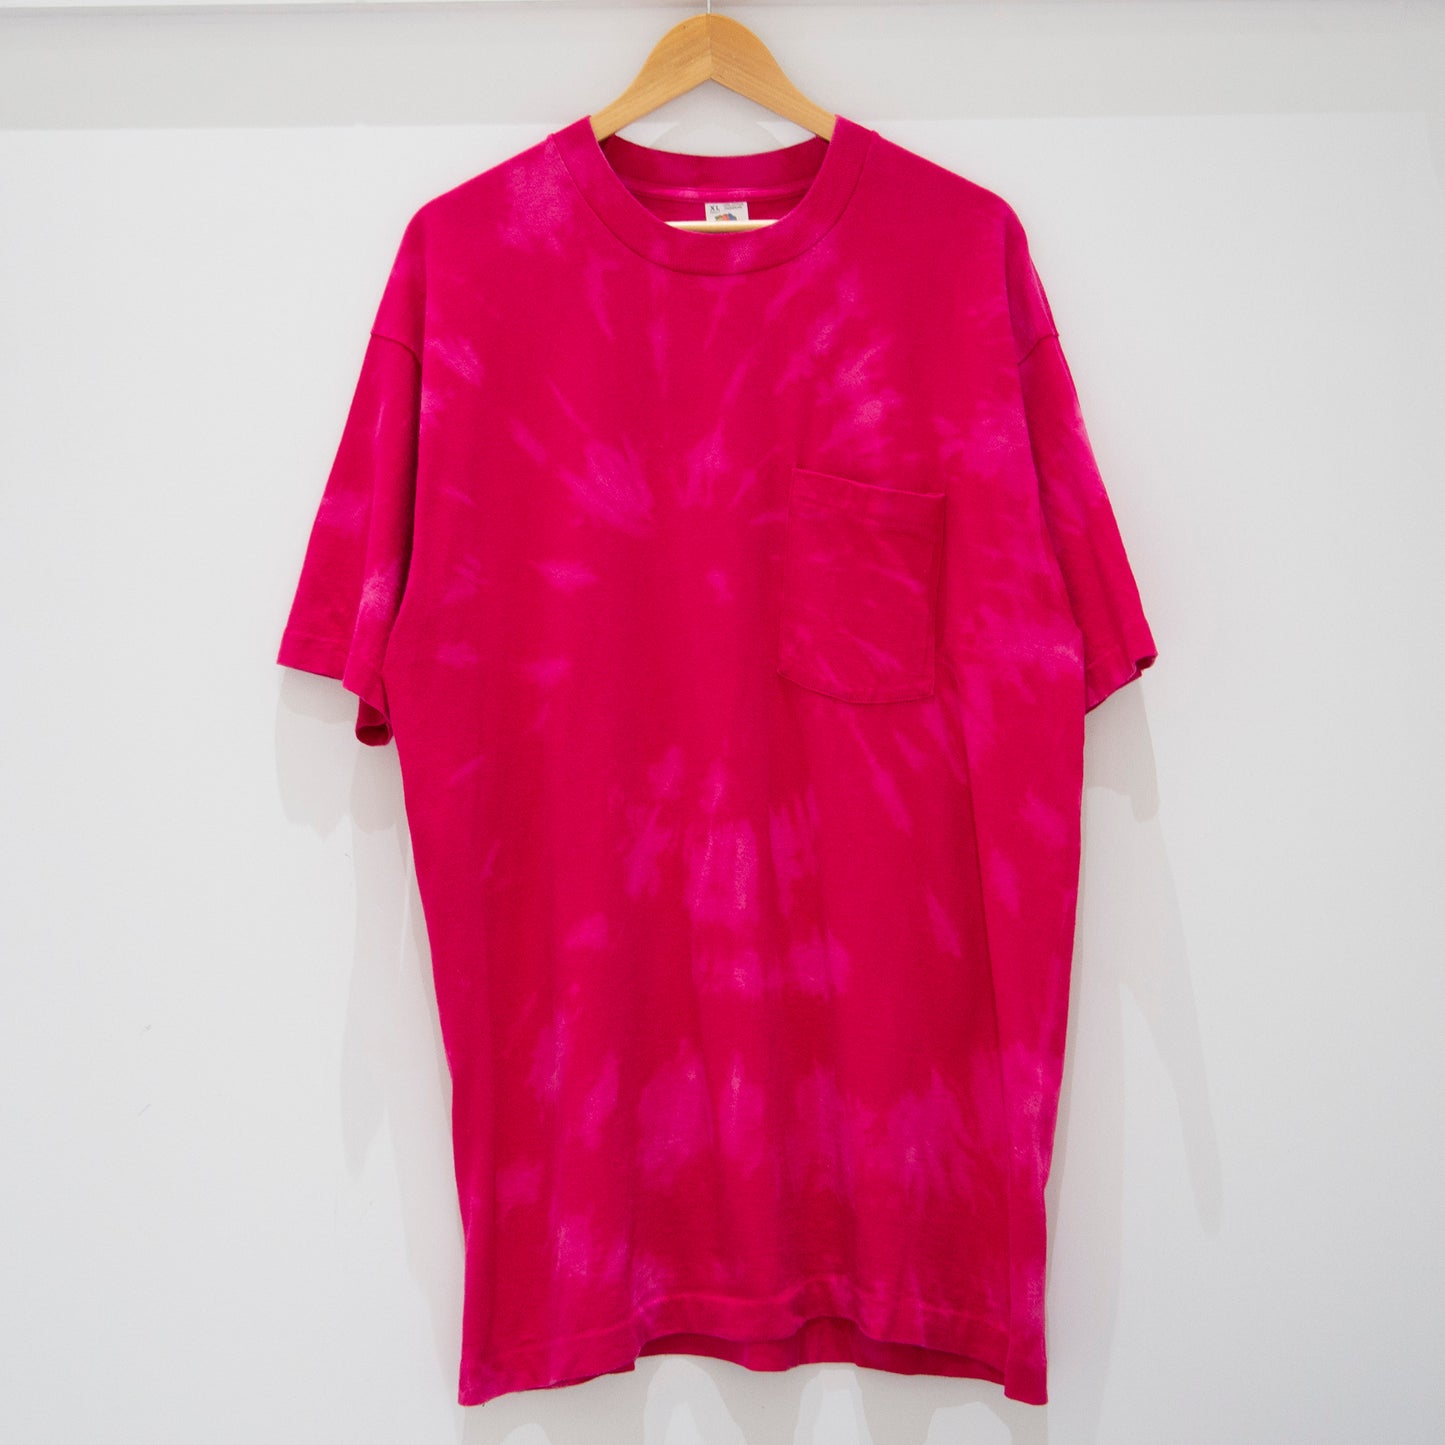 Early 90's Fruit of the Loom Pocket T-Shirt Tie Dyed XL